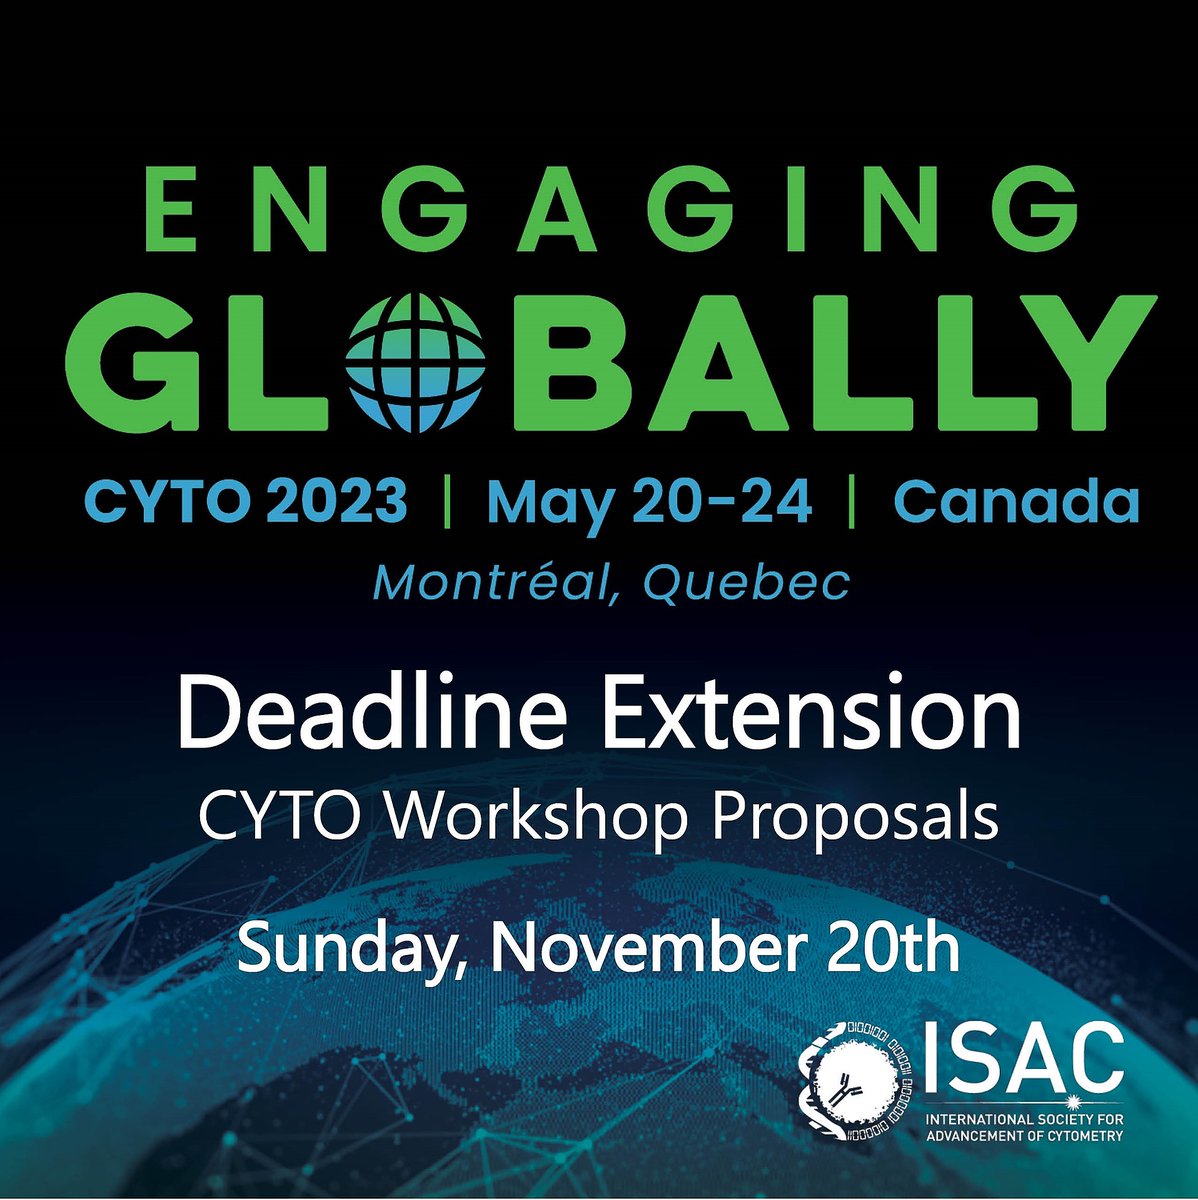 Deadline Extension!! CYTO 2023 Workshop Proposals due Sunday, November 20th Learn more and submit your workshop here: cytoconference.org/workshops.html #CYTO2023 #Cytometry #ISAC_CYTO